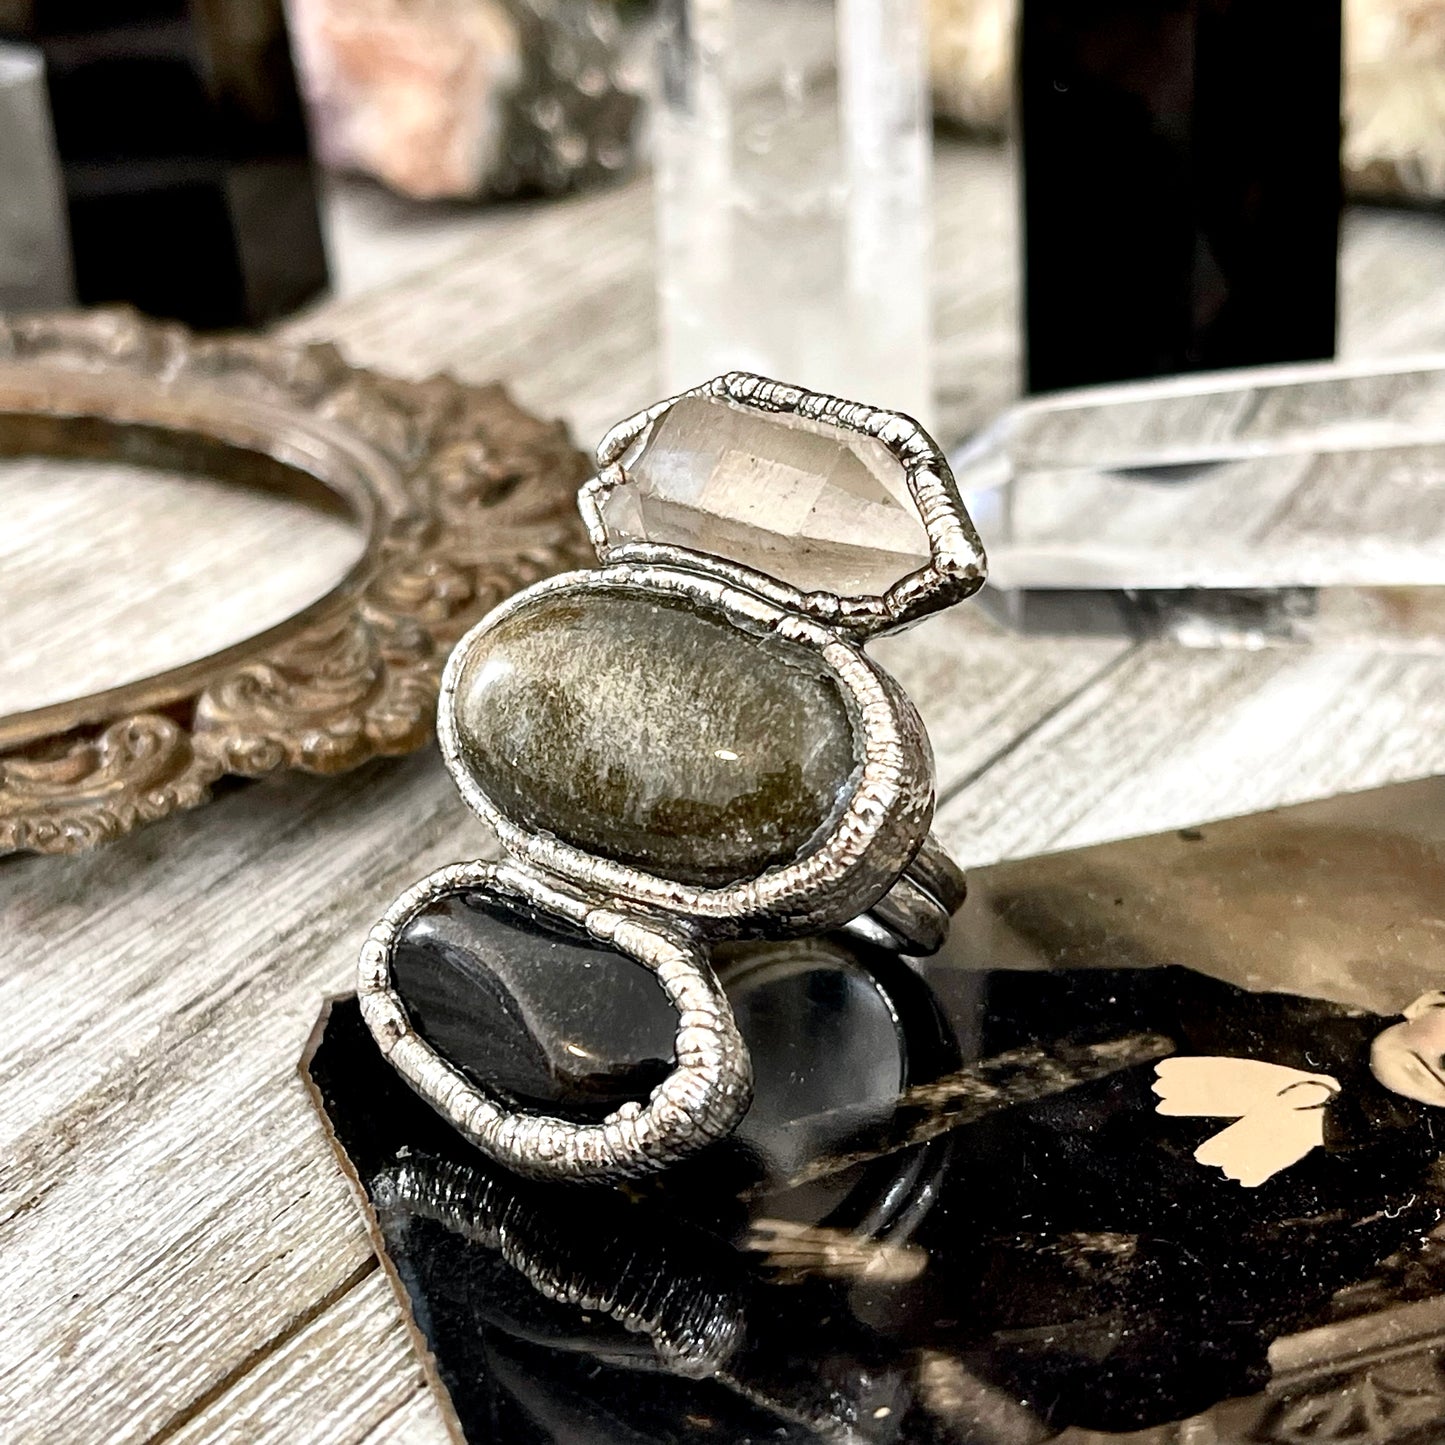 Size 7.5 Crystal Ring - Three Stone Ring Black Onyx Clear Quartz Silver Sheen Obsidian Ring / Foxlark Collection - One of a Kind